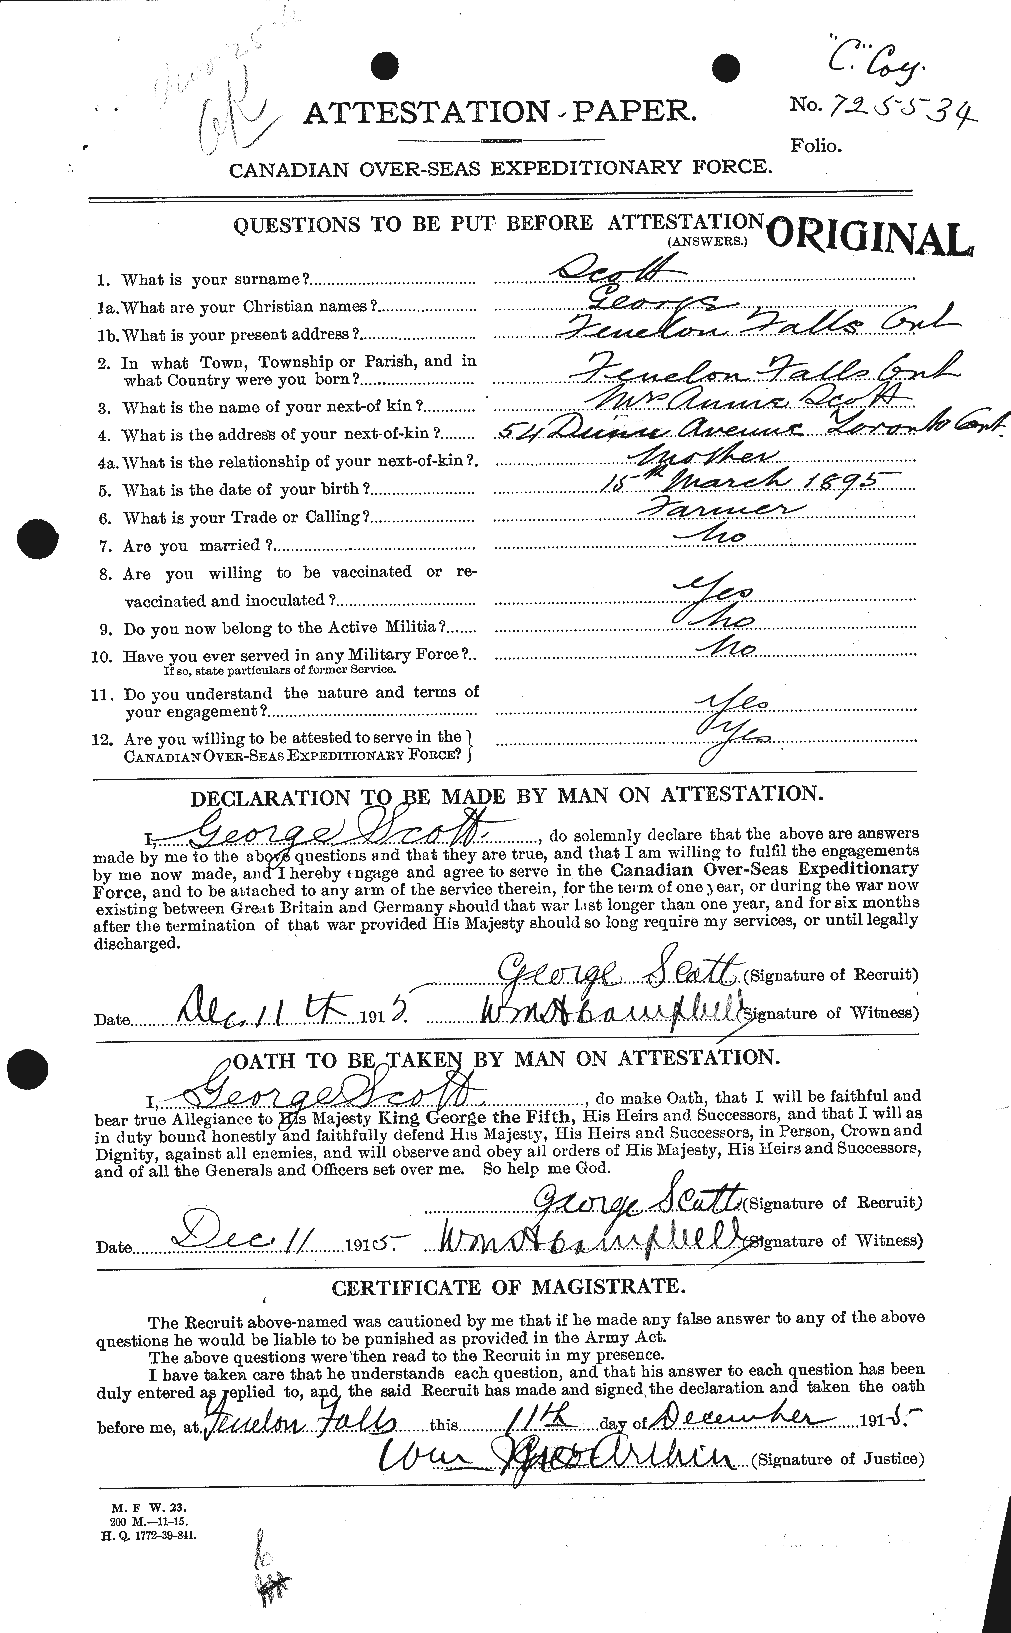 Personnel Records of the First World War - CEF 083588a